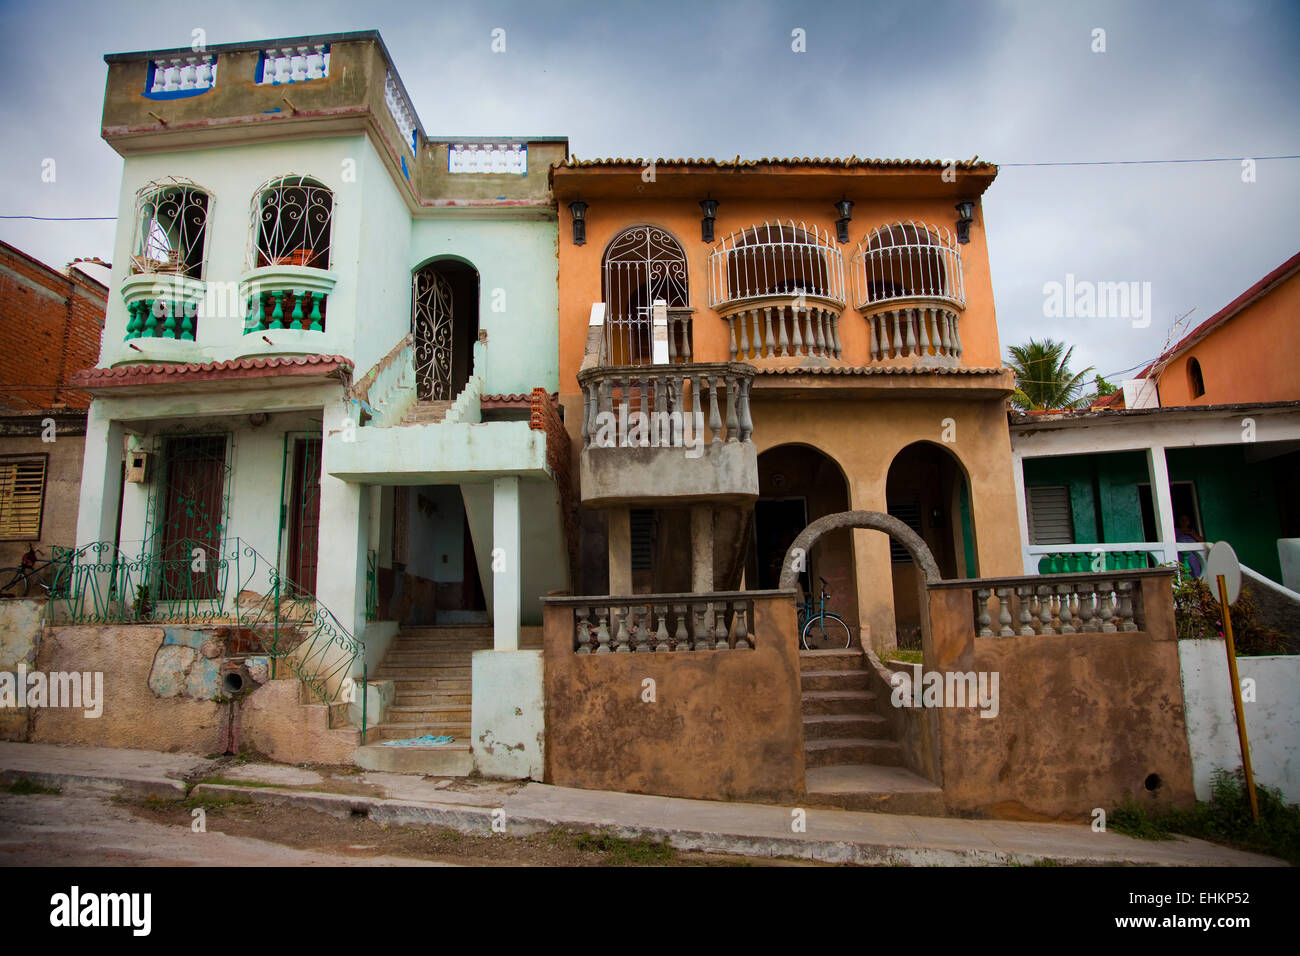 Crumbling housing in a poor area of Trinidad, Cuba Stock Photo